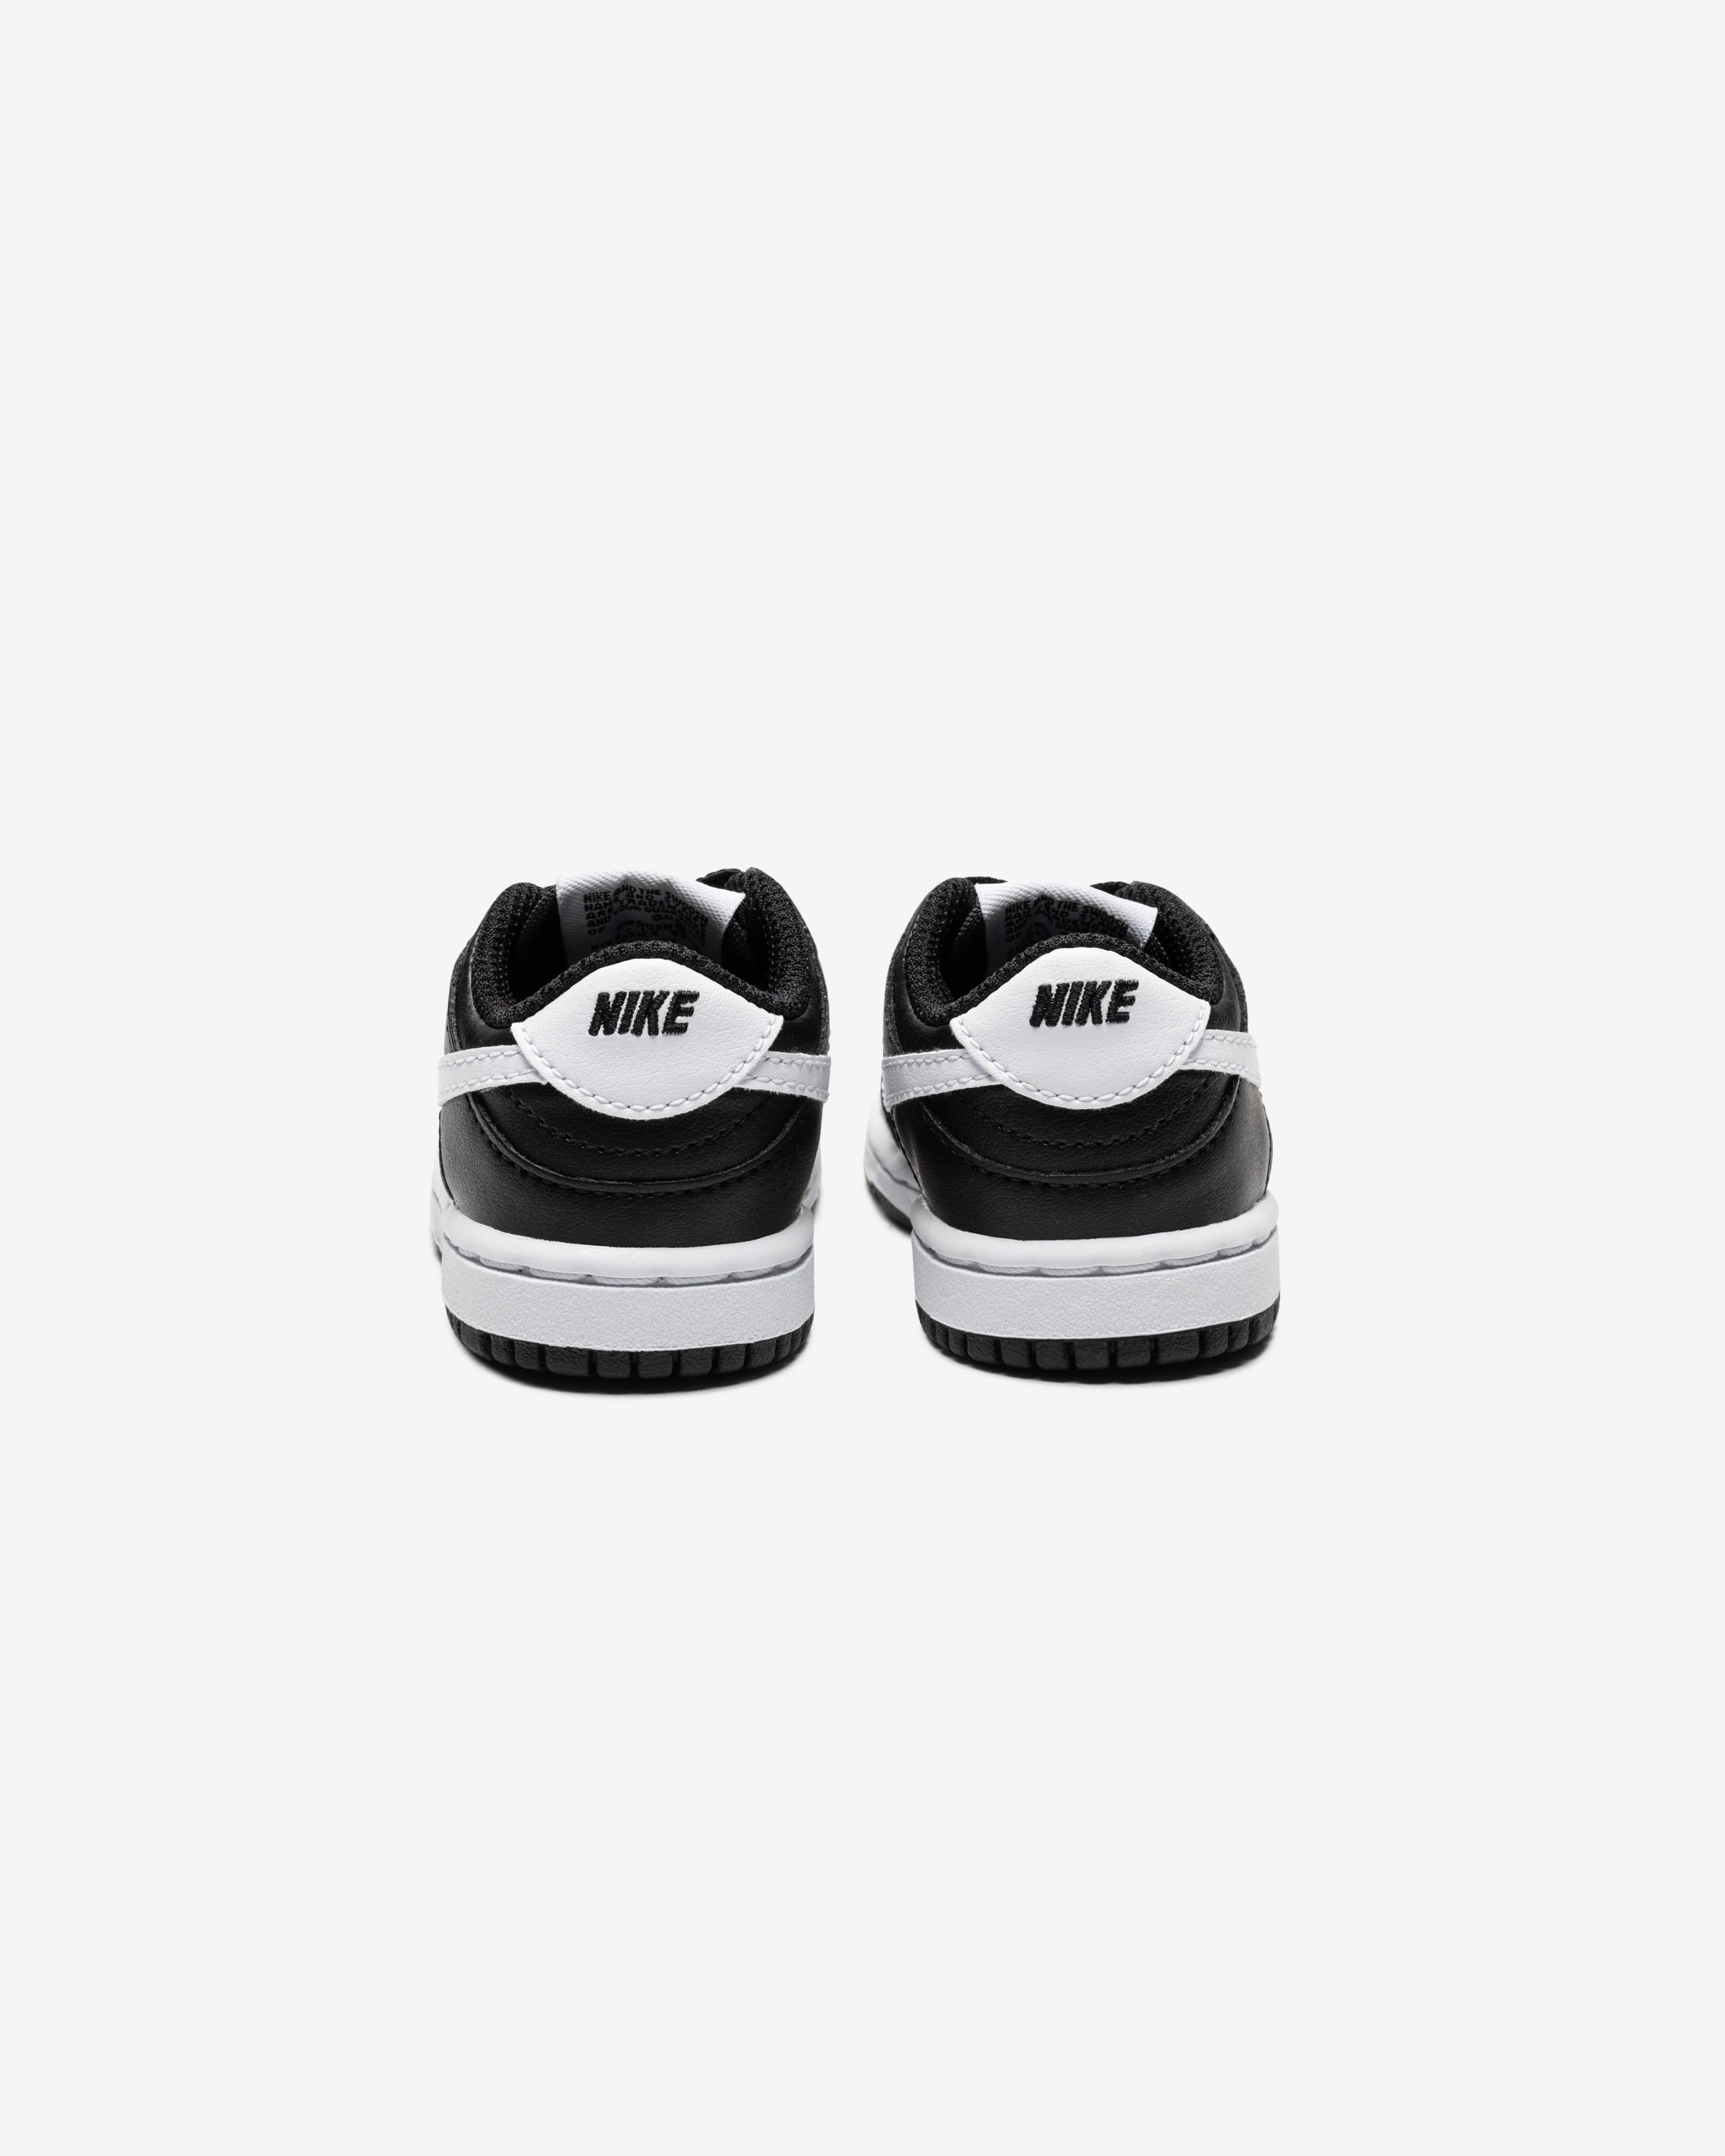 NIKE TD DUNK LOW - BLACK/ WHITE – Undefeated